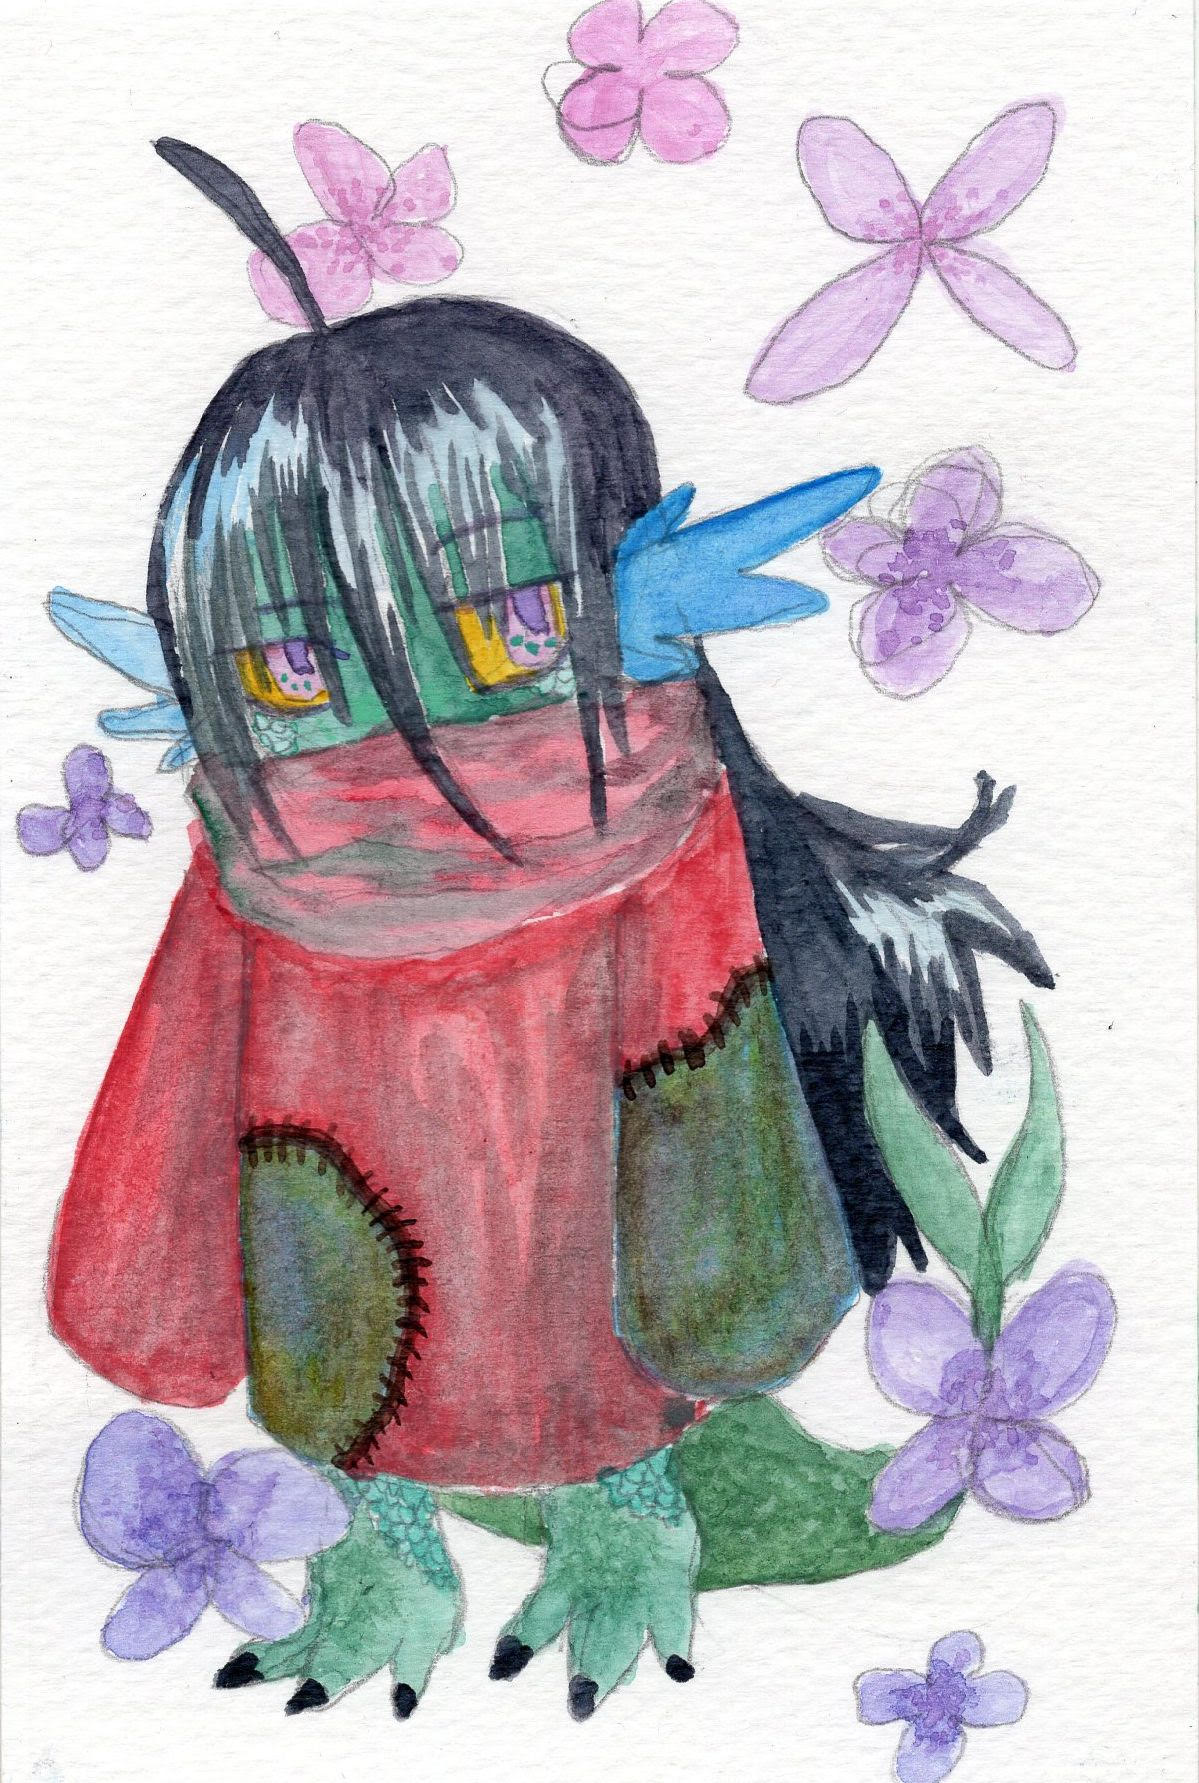 a grey-teal scaly creature with a fish tale and big yellow eyes and black hair, it wears a faded red sweater